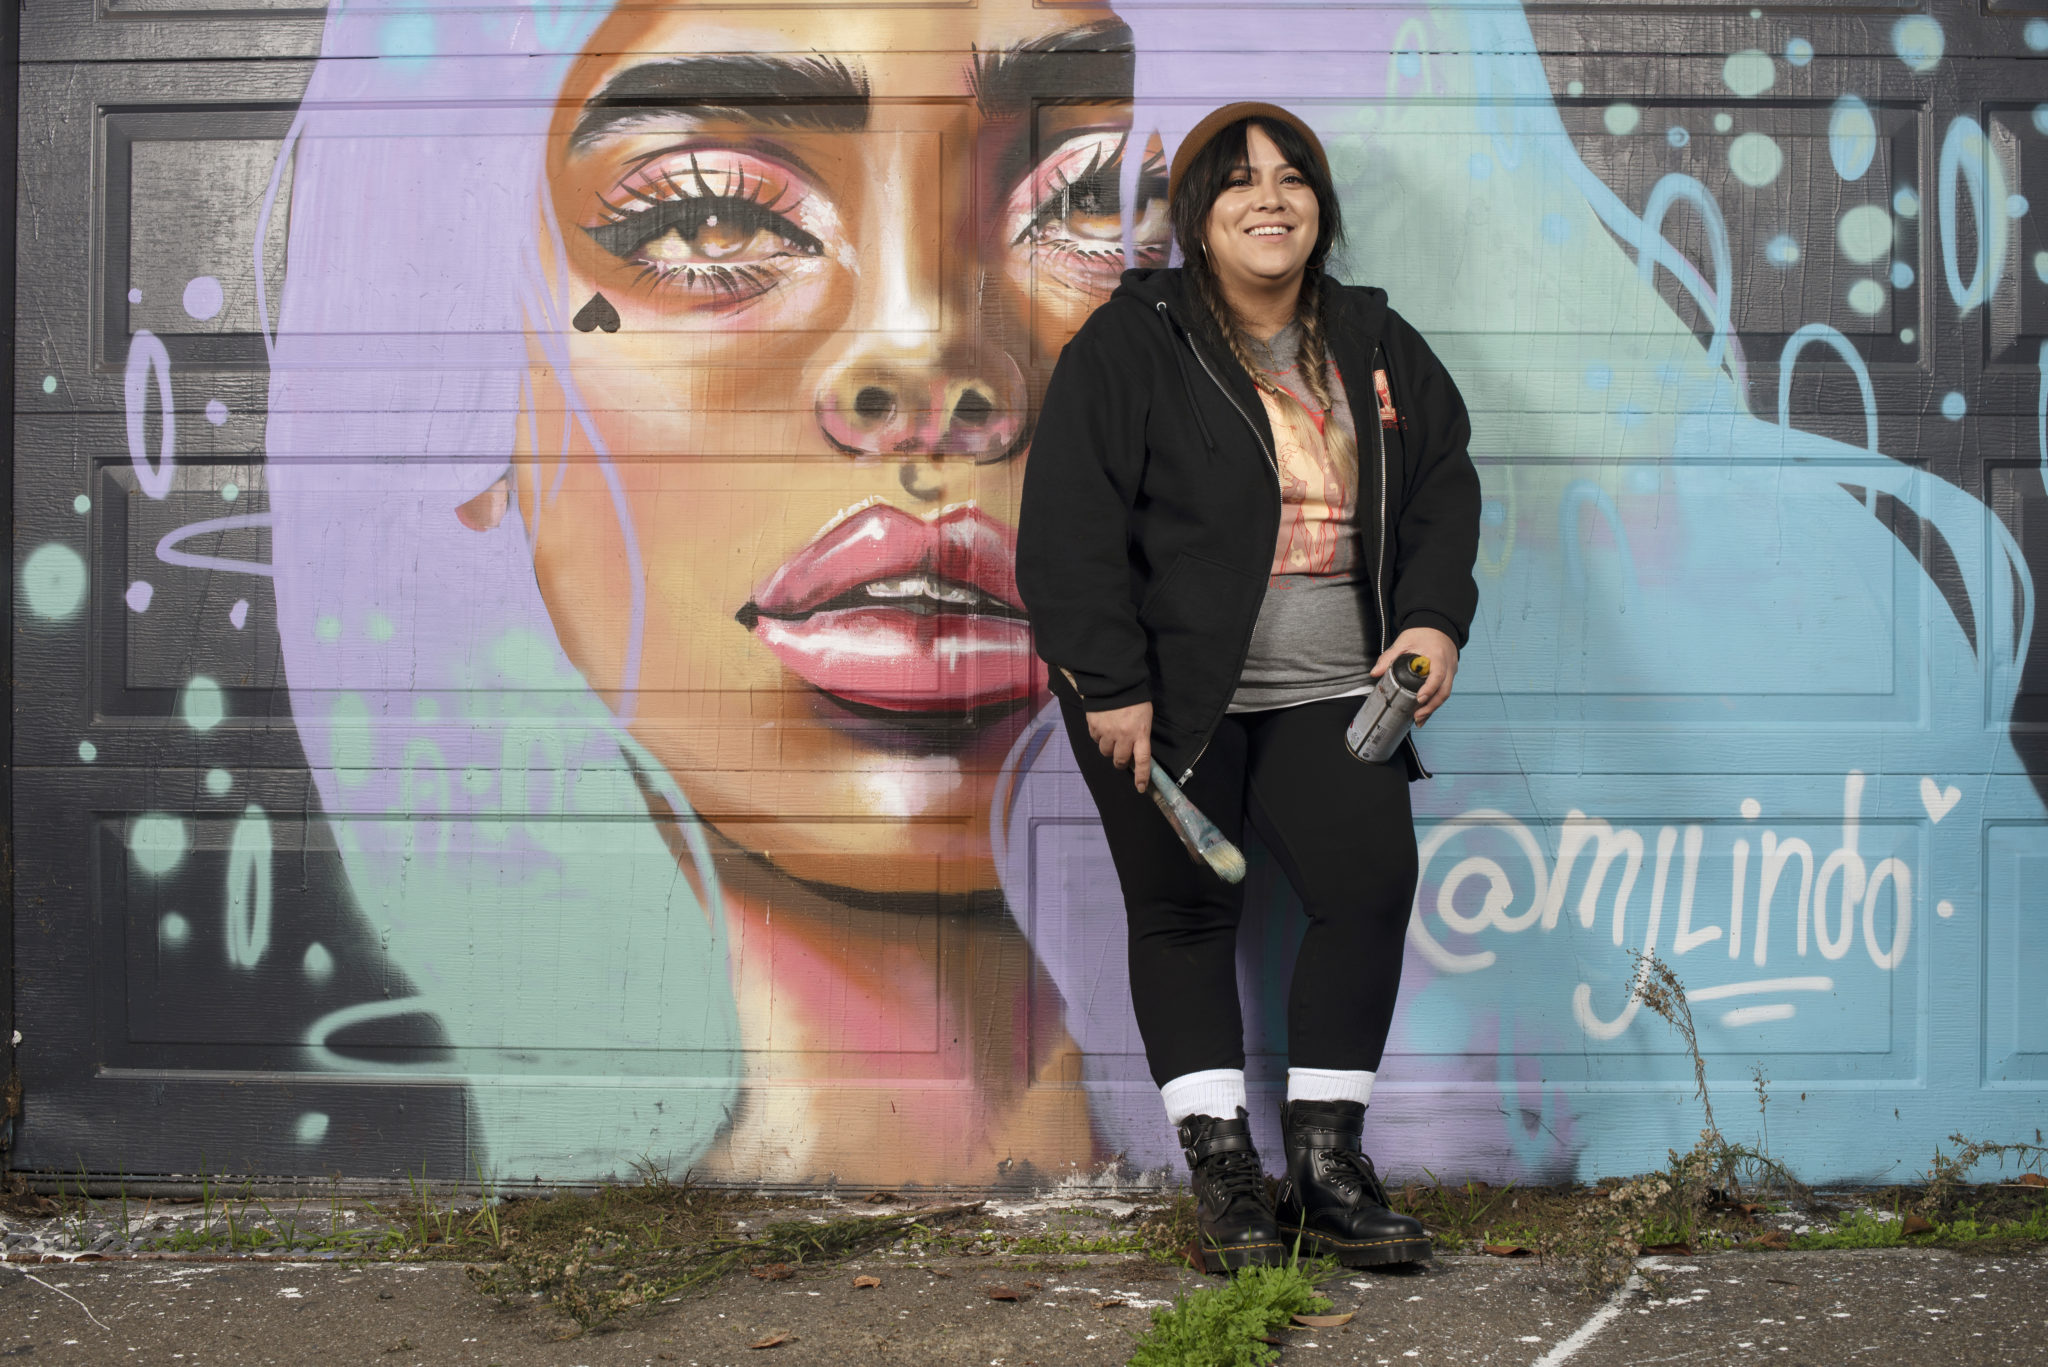 Painter and street mural artist MJ Lindo-Lawyer at a mural she created on a building on Santa Rosa Avenue near highway 12 in Santa Rosa, California. January 13, 2021. (Photo: Erik Castro/for Sonoma Magazine)